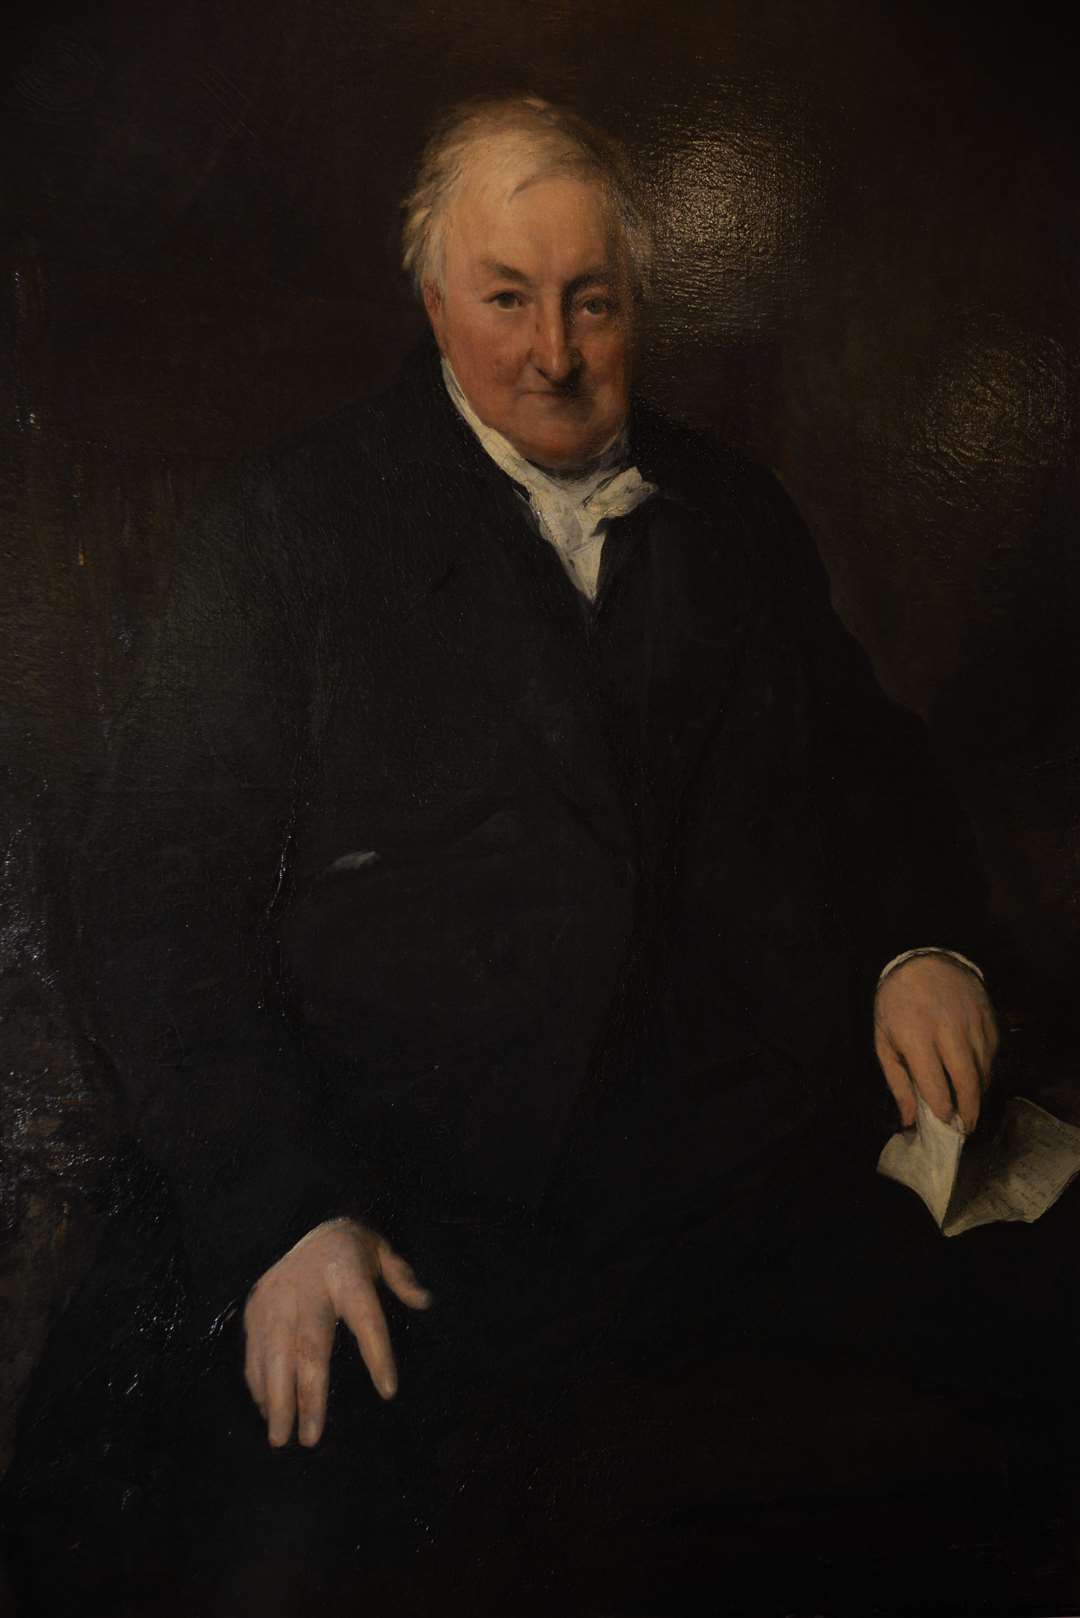 The portrait of The Rev John Poore in the council chamber at Swale House